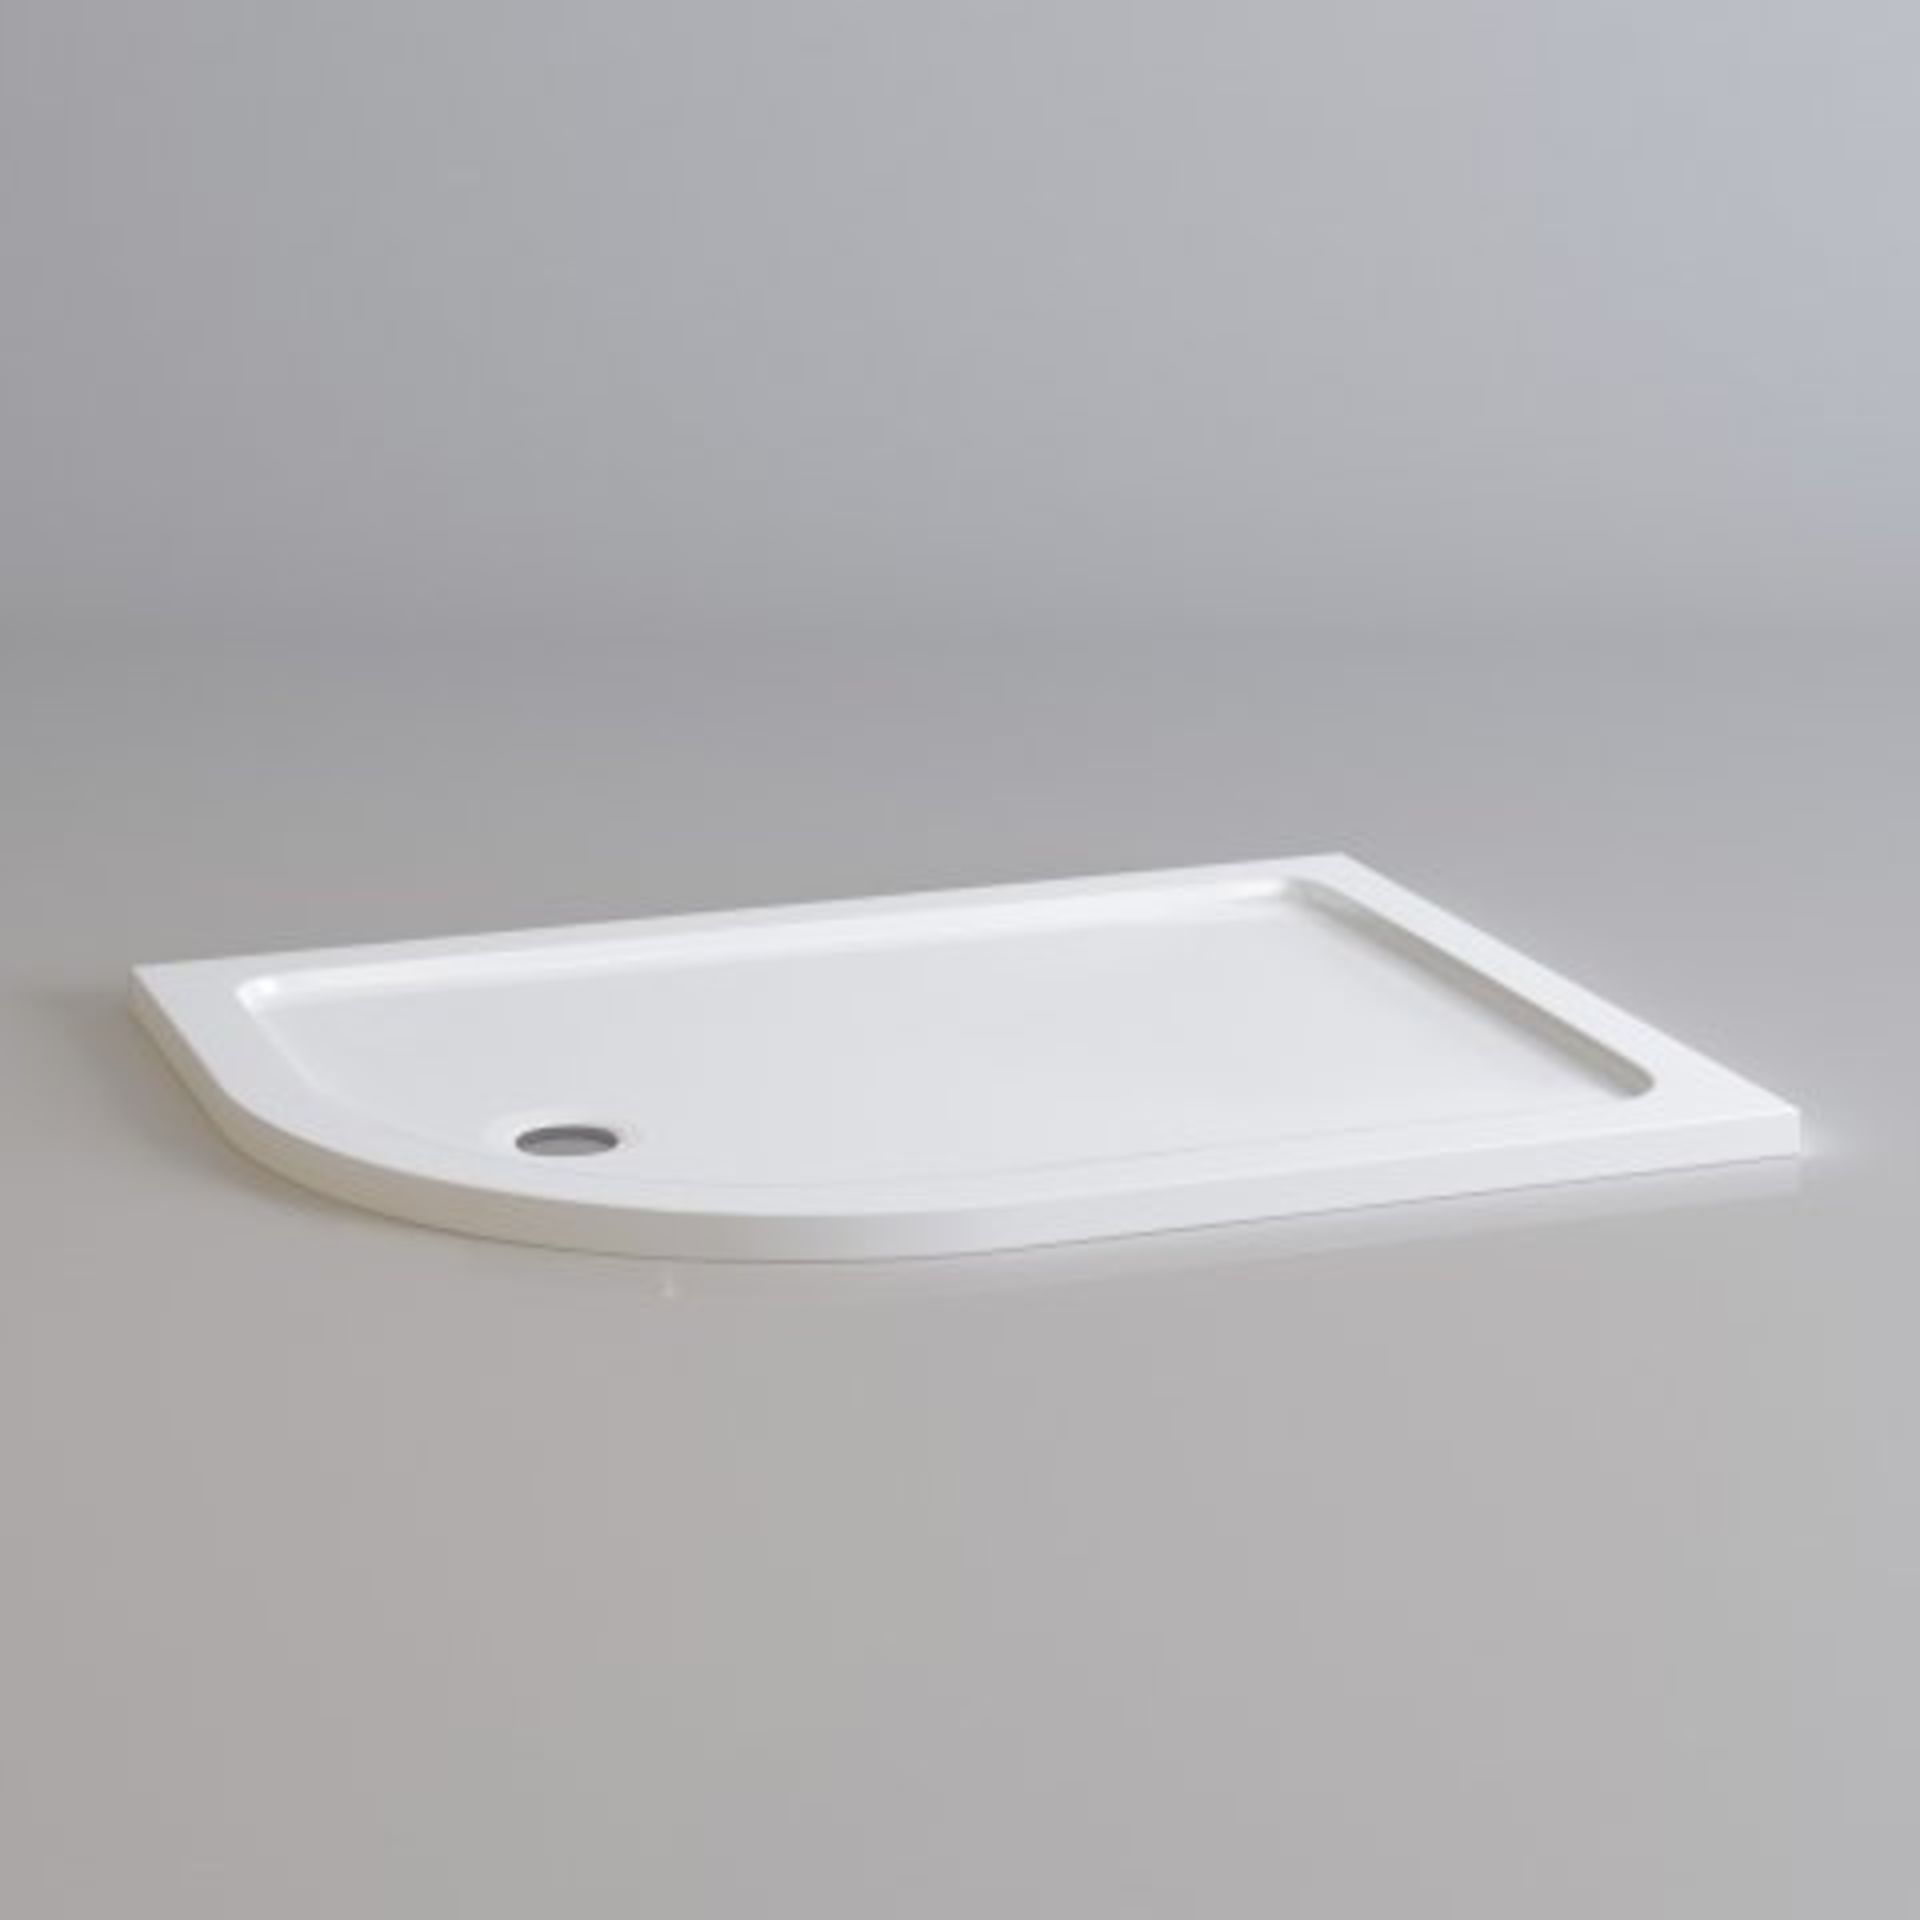 (M36) 1200x900mm Offset Quadrant Ultraslim Stone Shower Tray - Left. RRP £324.99. Designed and